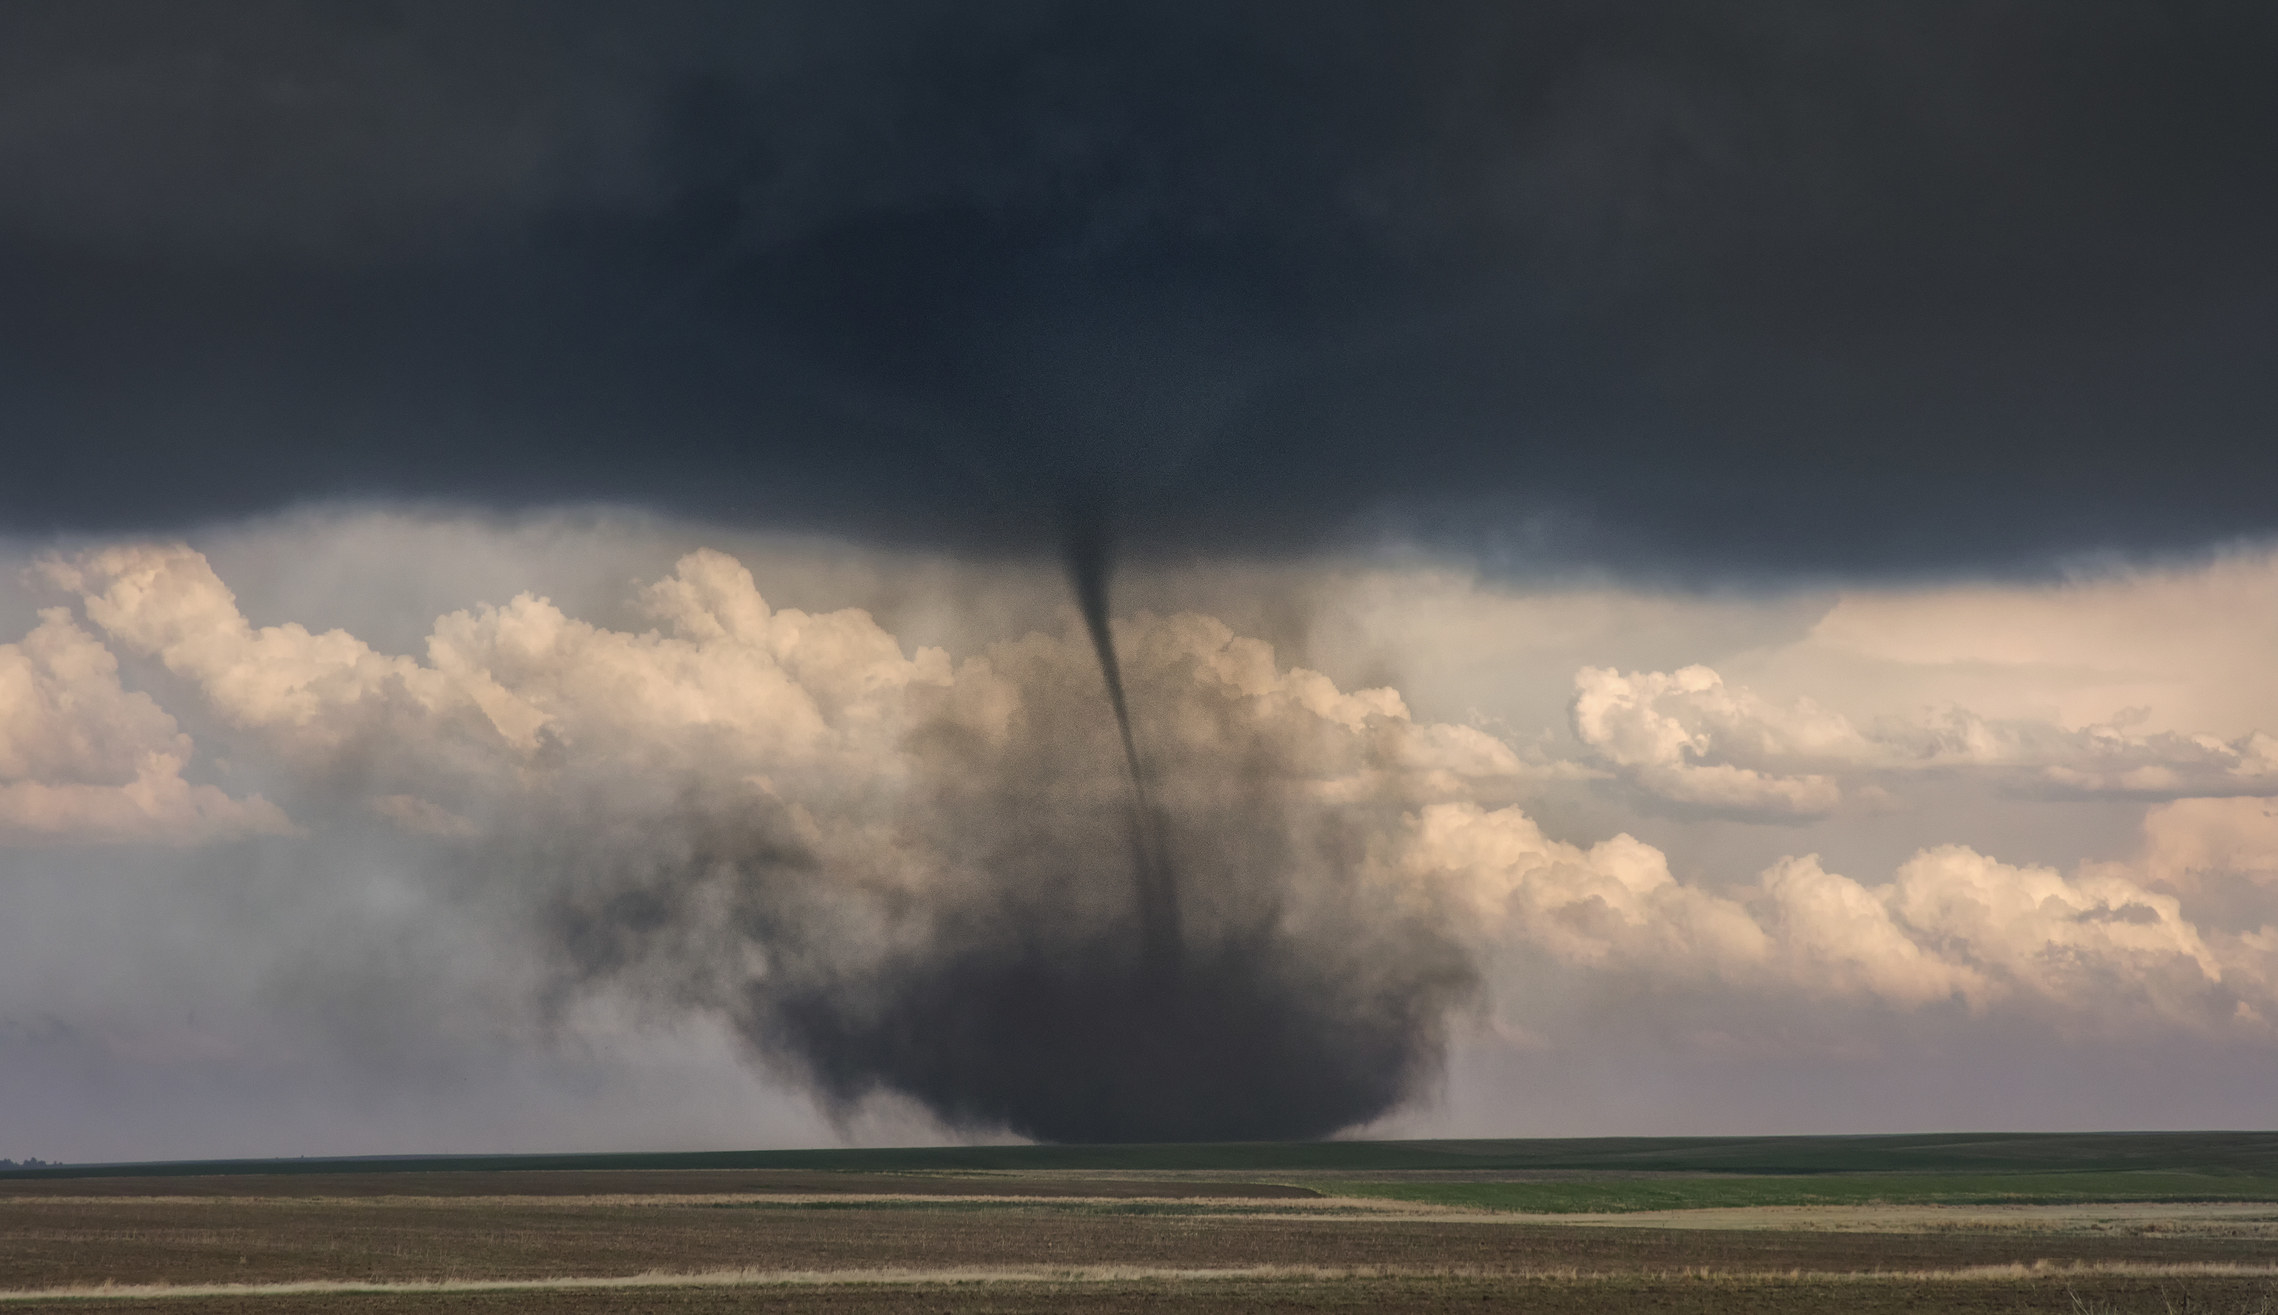 A stock image of a landspout forming in a field